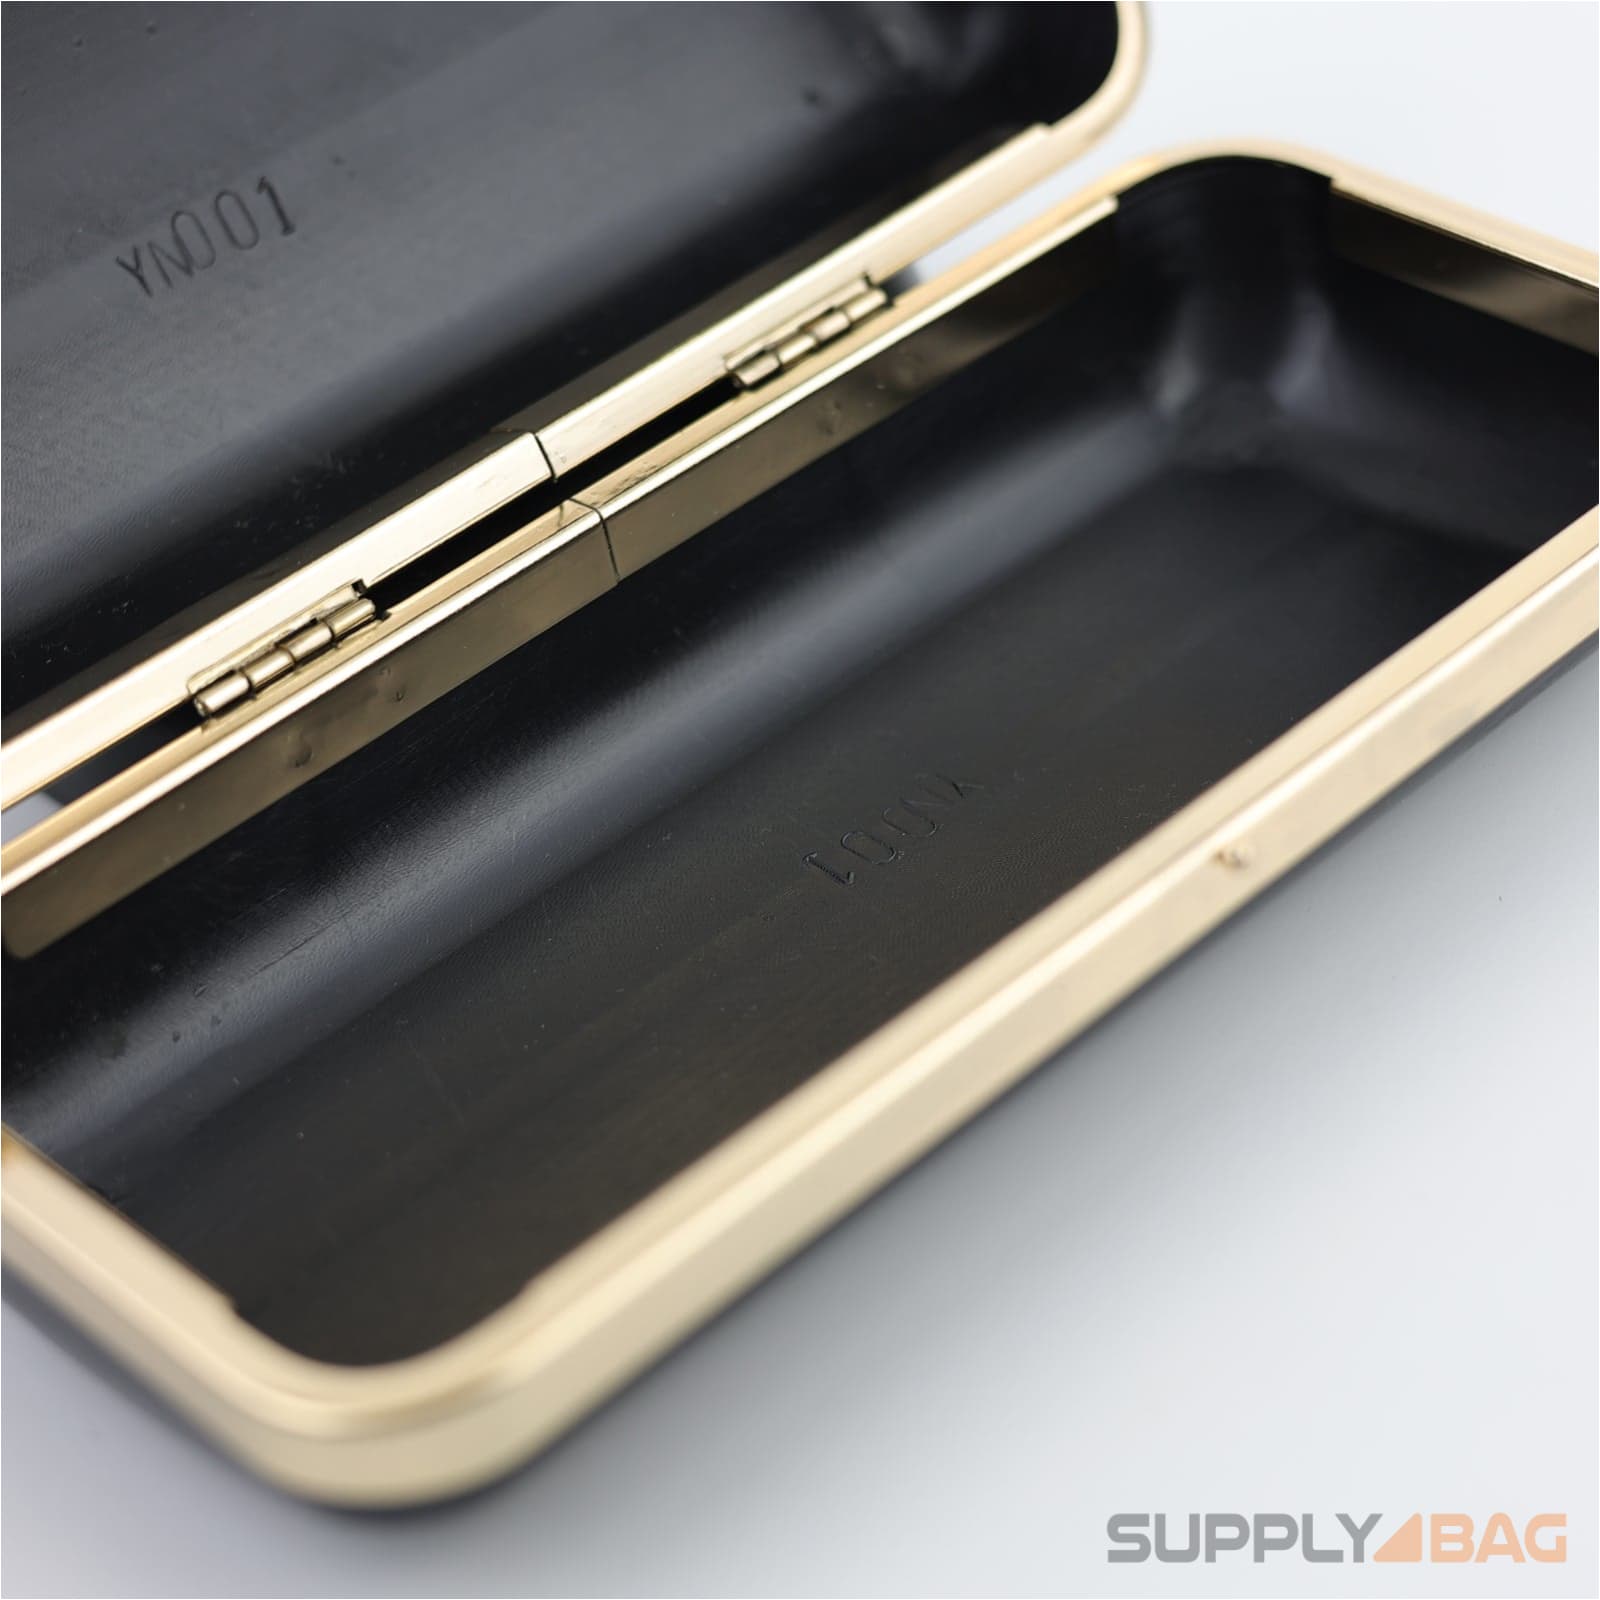 7 x 3 inch - Gold Clamshell Clutch Frame with Covers